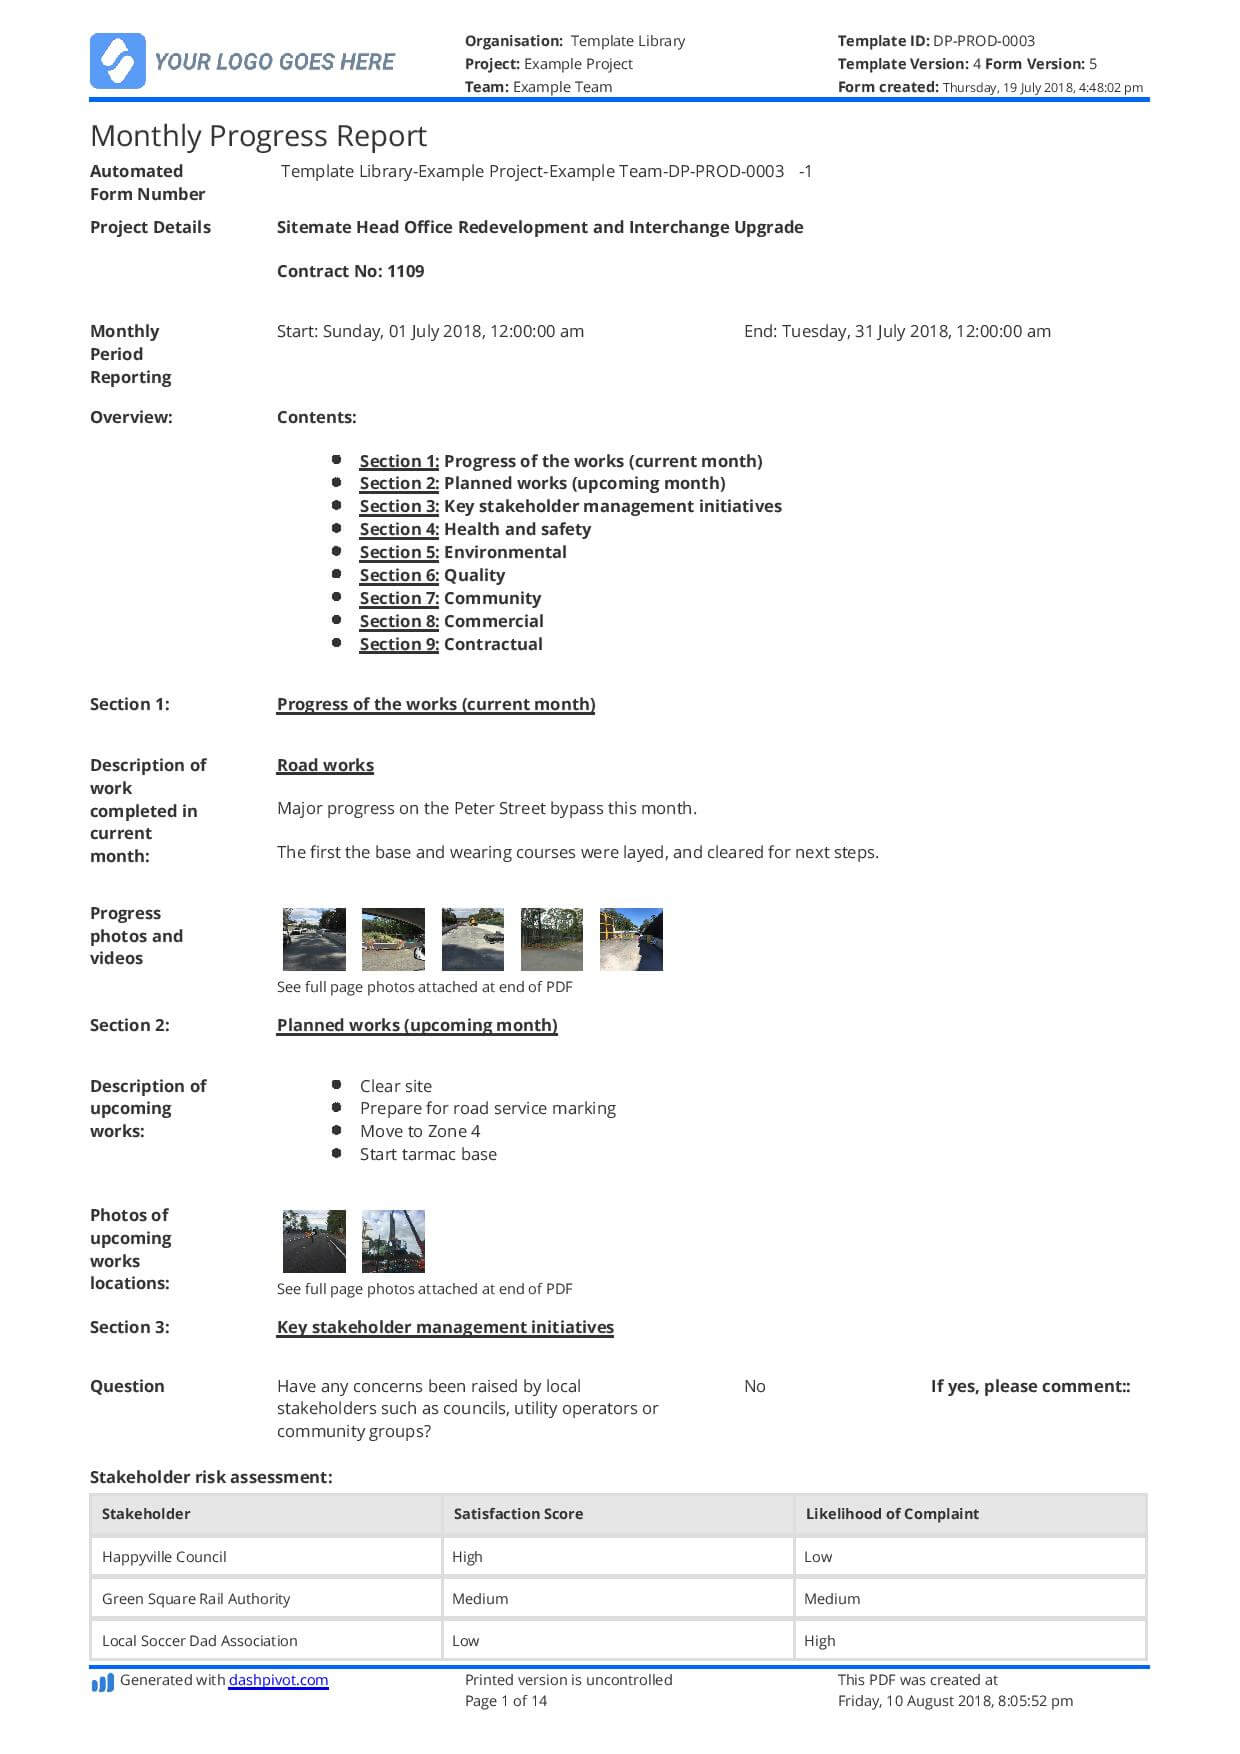 Monthly Construction Progress Report Template: Use This Inside Engineering Progress Report Template